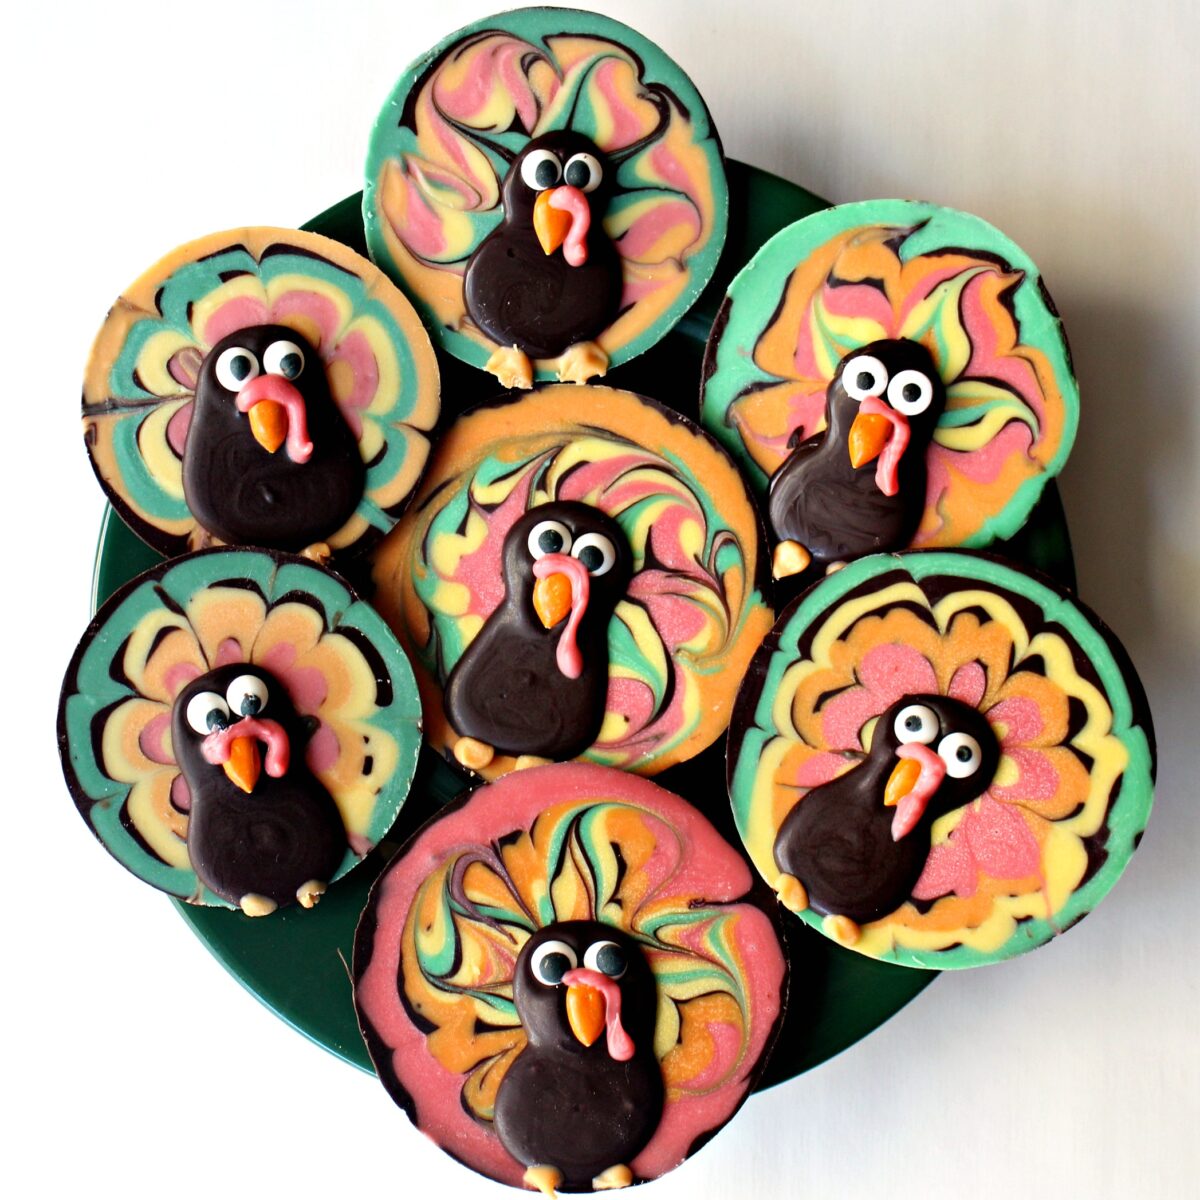 Colorful Chocolate Bark Turkey discs on a serving platter.